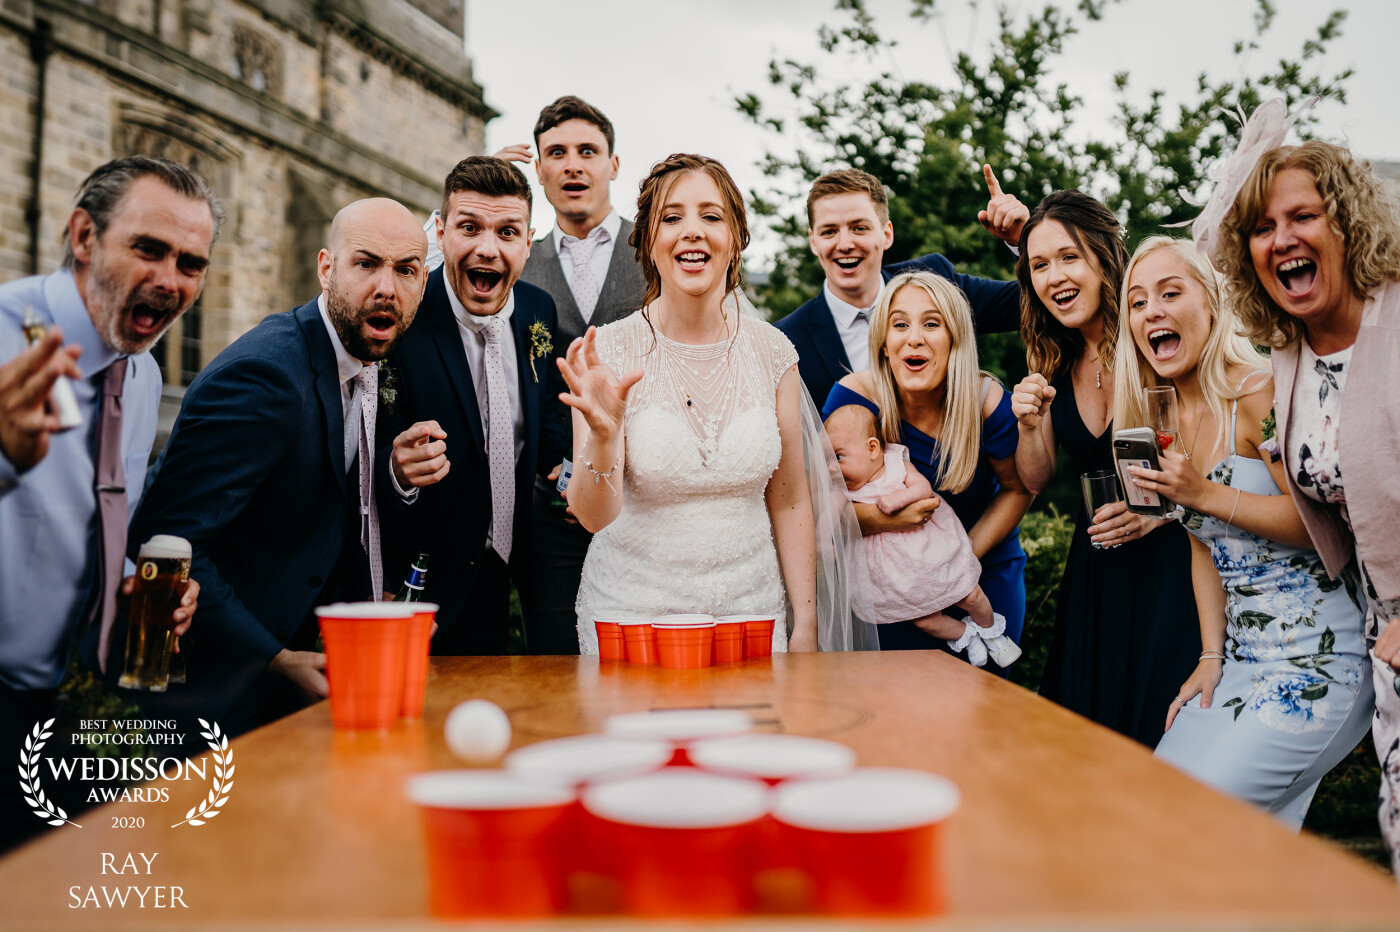 Beer Pong at a wedding - Great Idea! Especially when the bride nails it in the corner cup. Get chugging those beers, boys! The reaction of the guests is priceless!